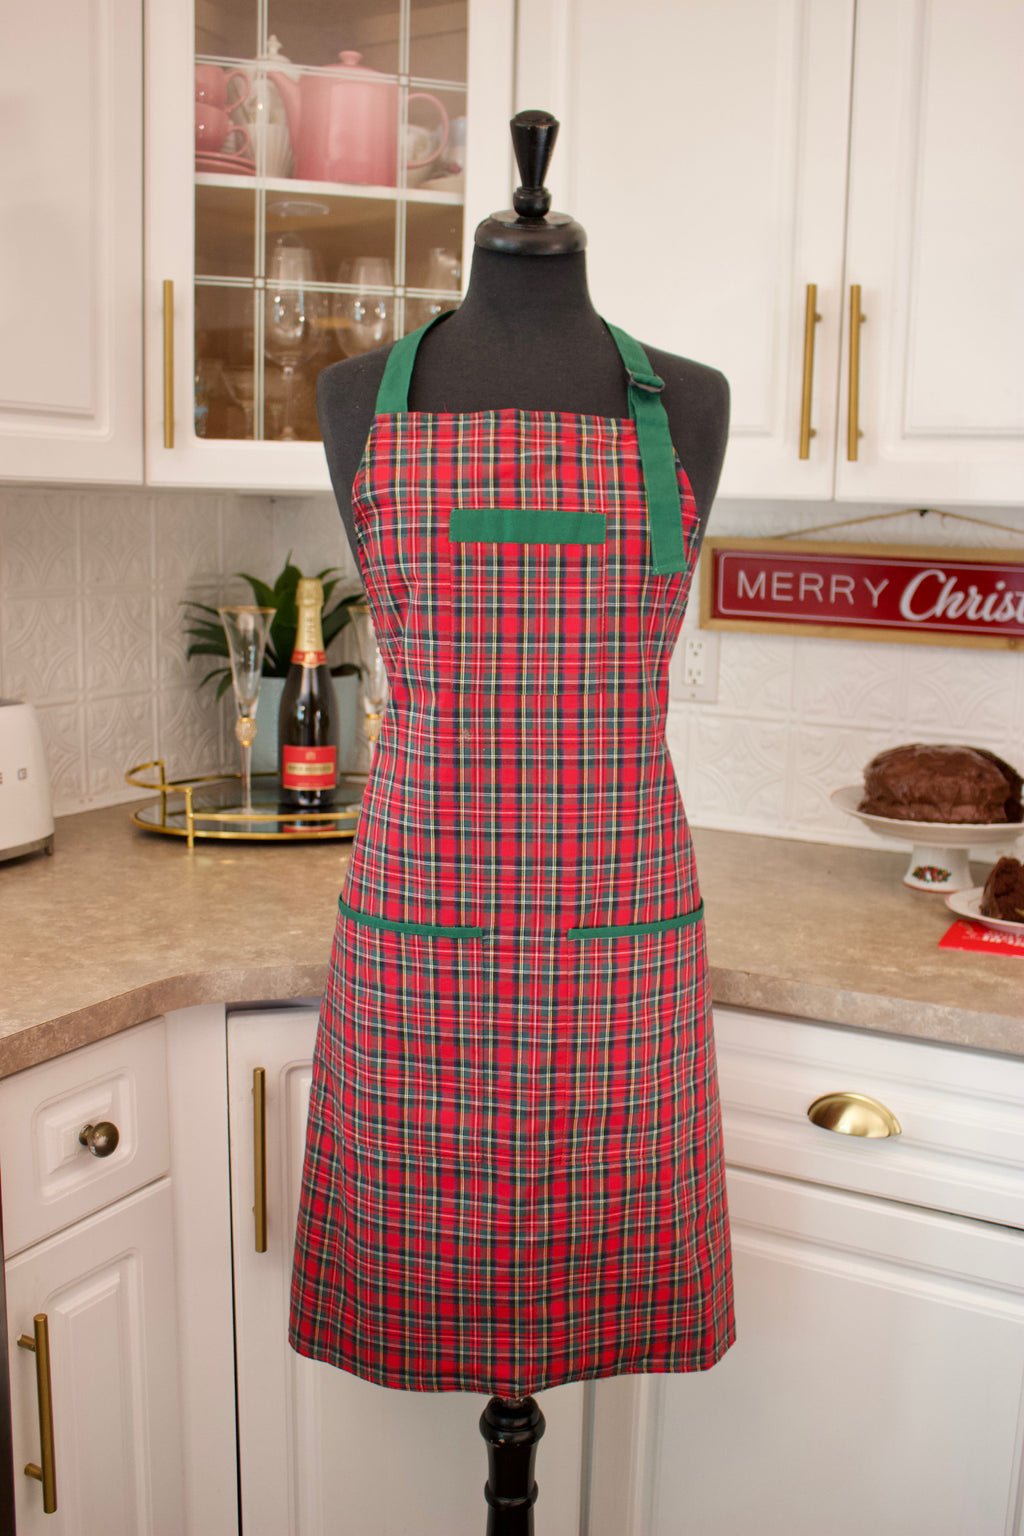 The Boyfriend Apron in Red Plaid For Christmas